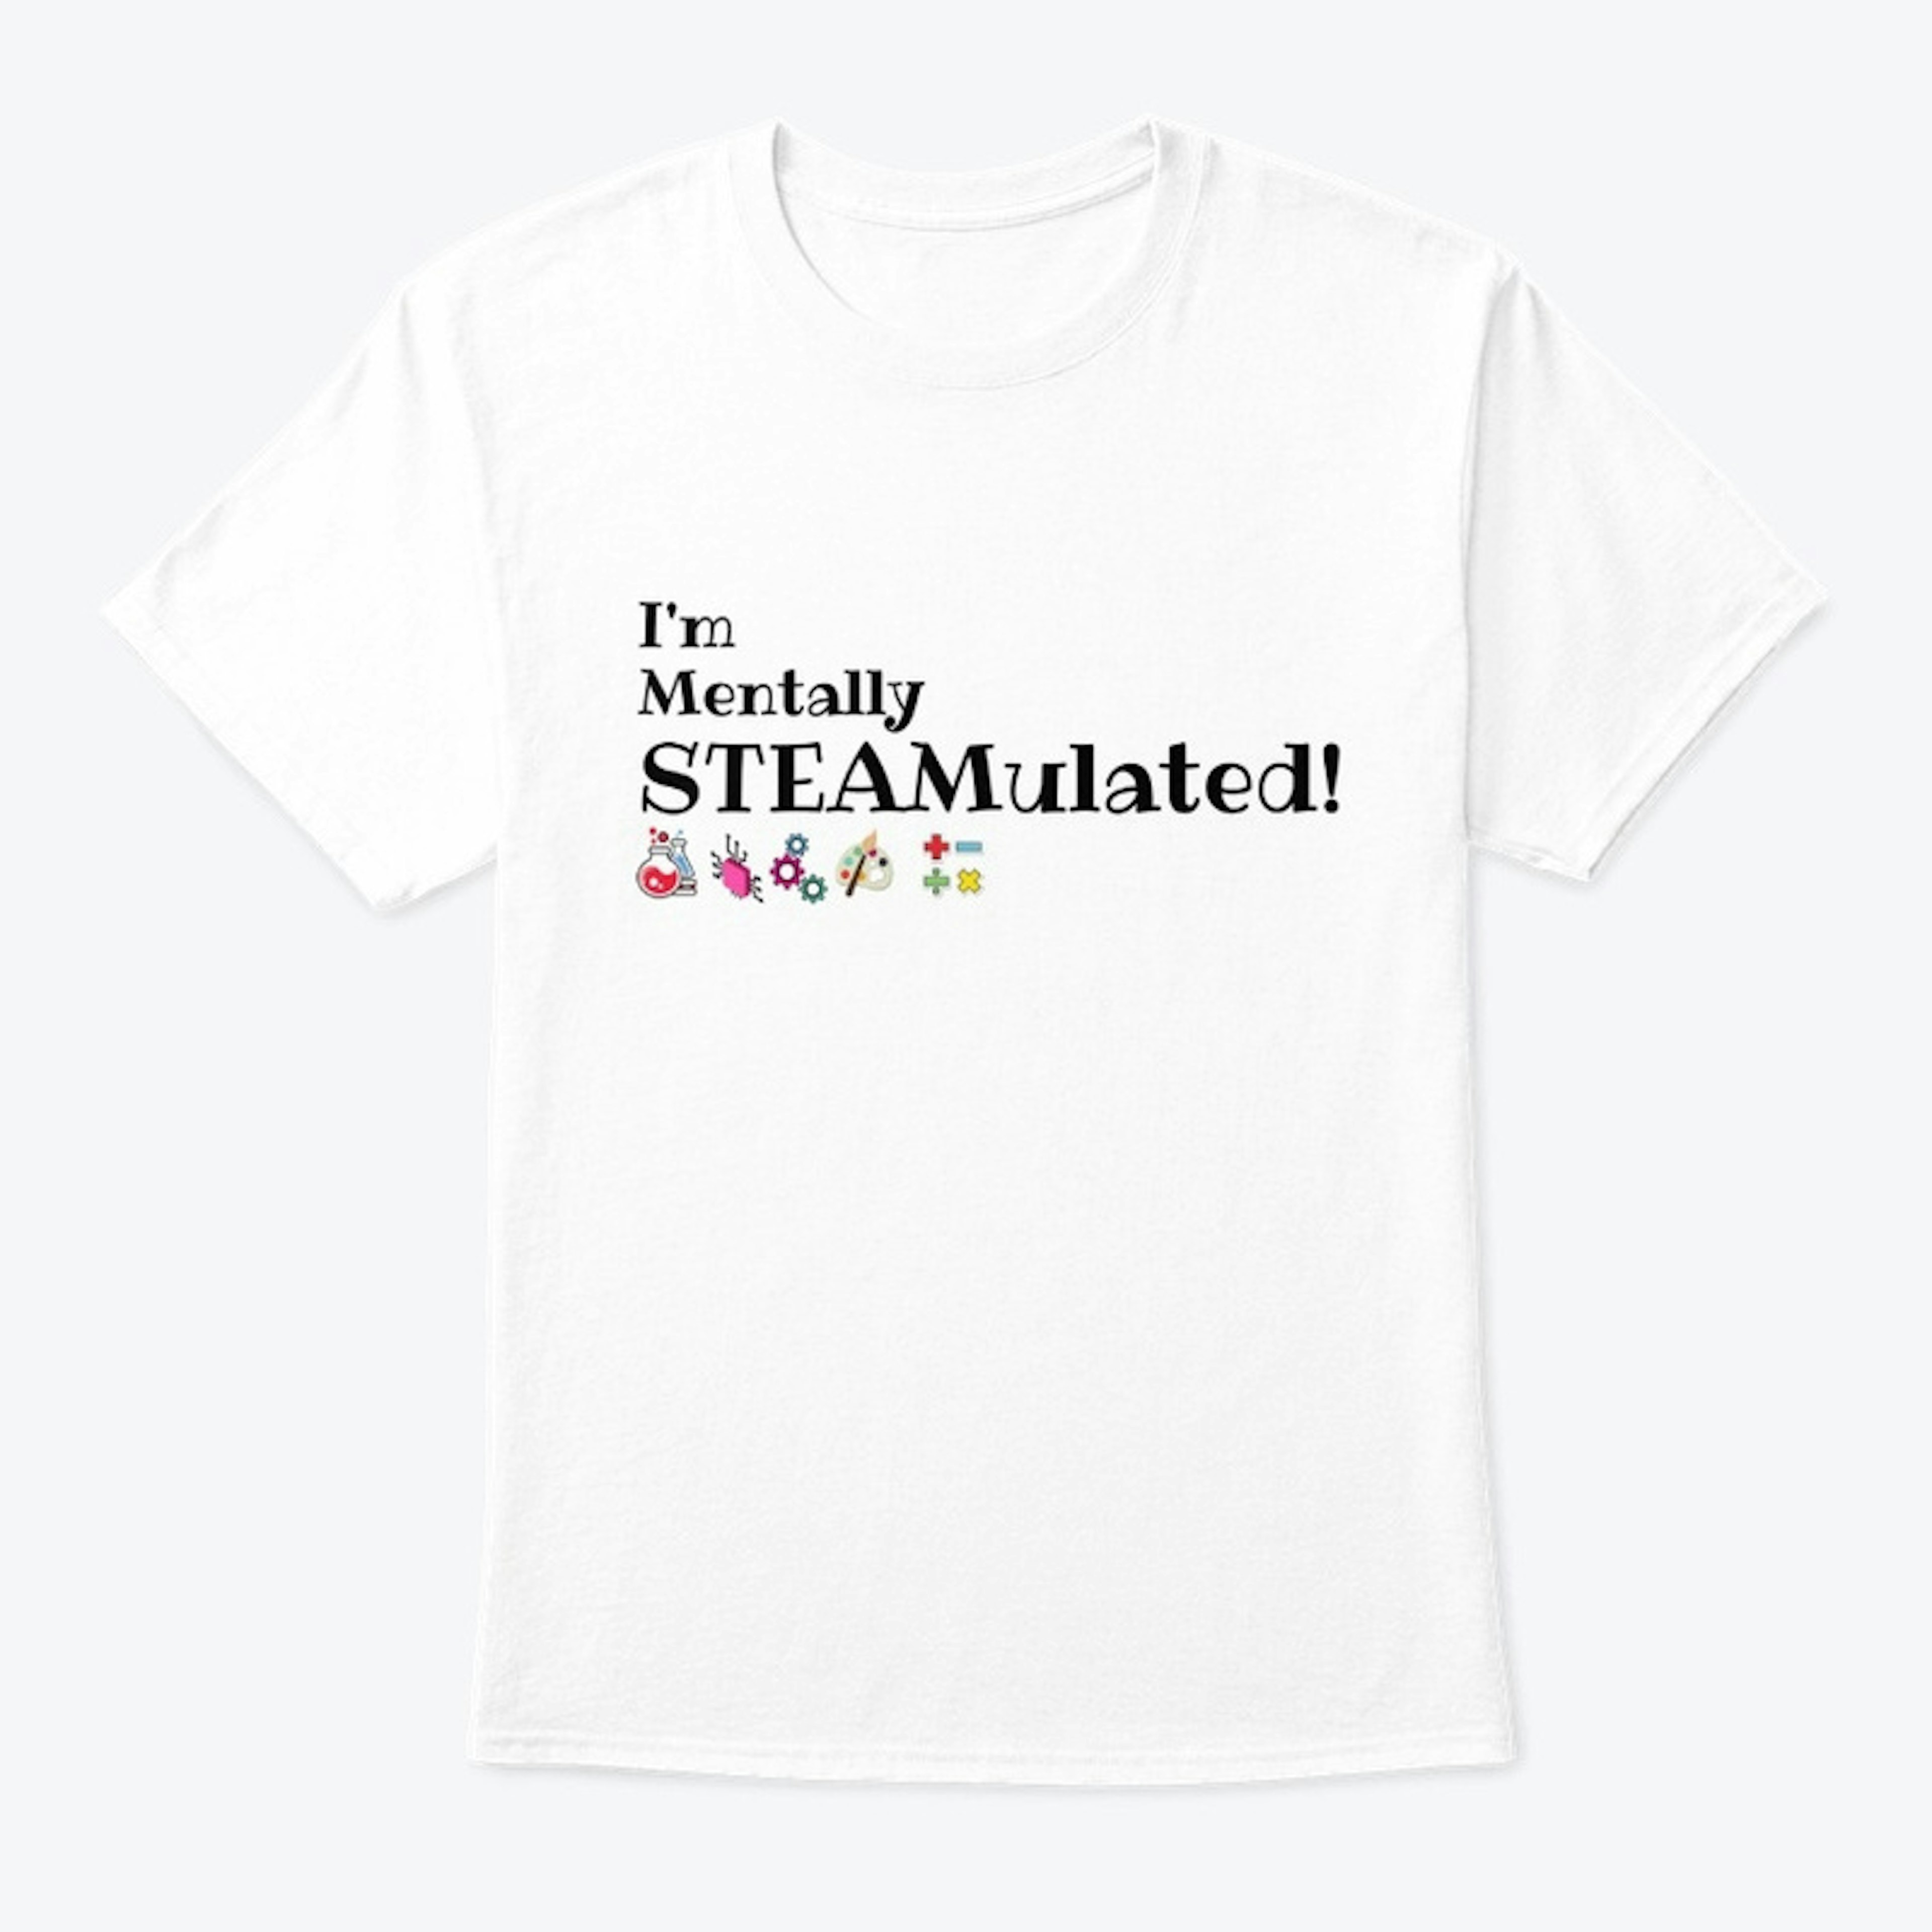 I'm Mentally STEAMulated! (White)